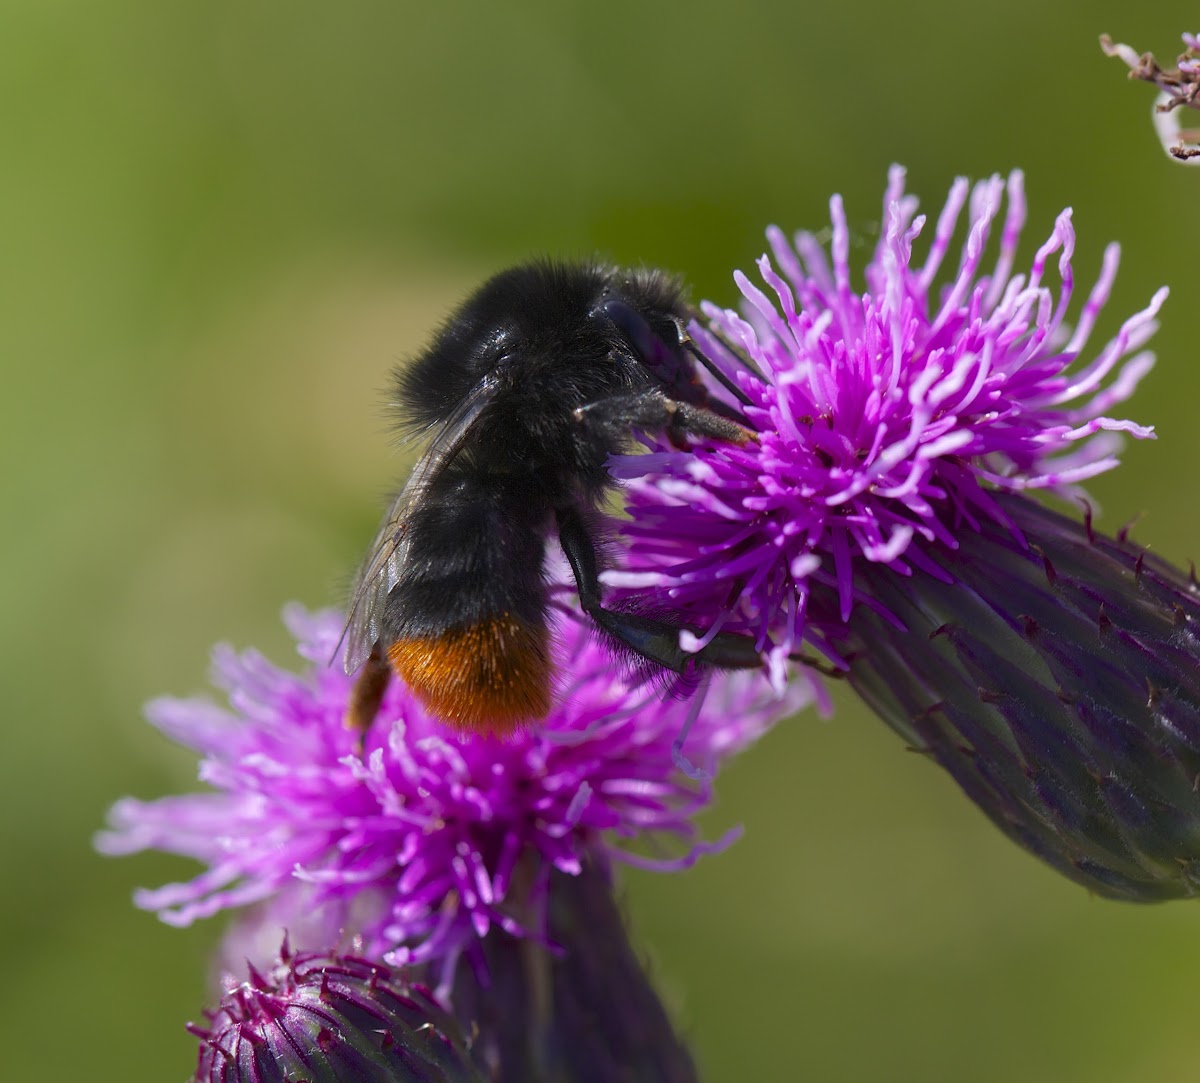 red tailed bumblebee